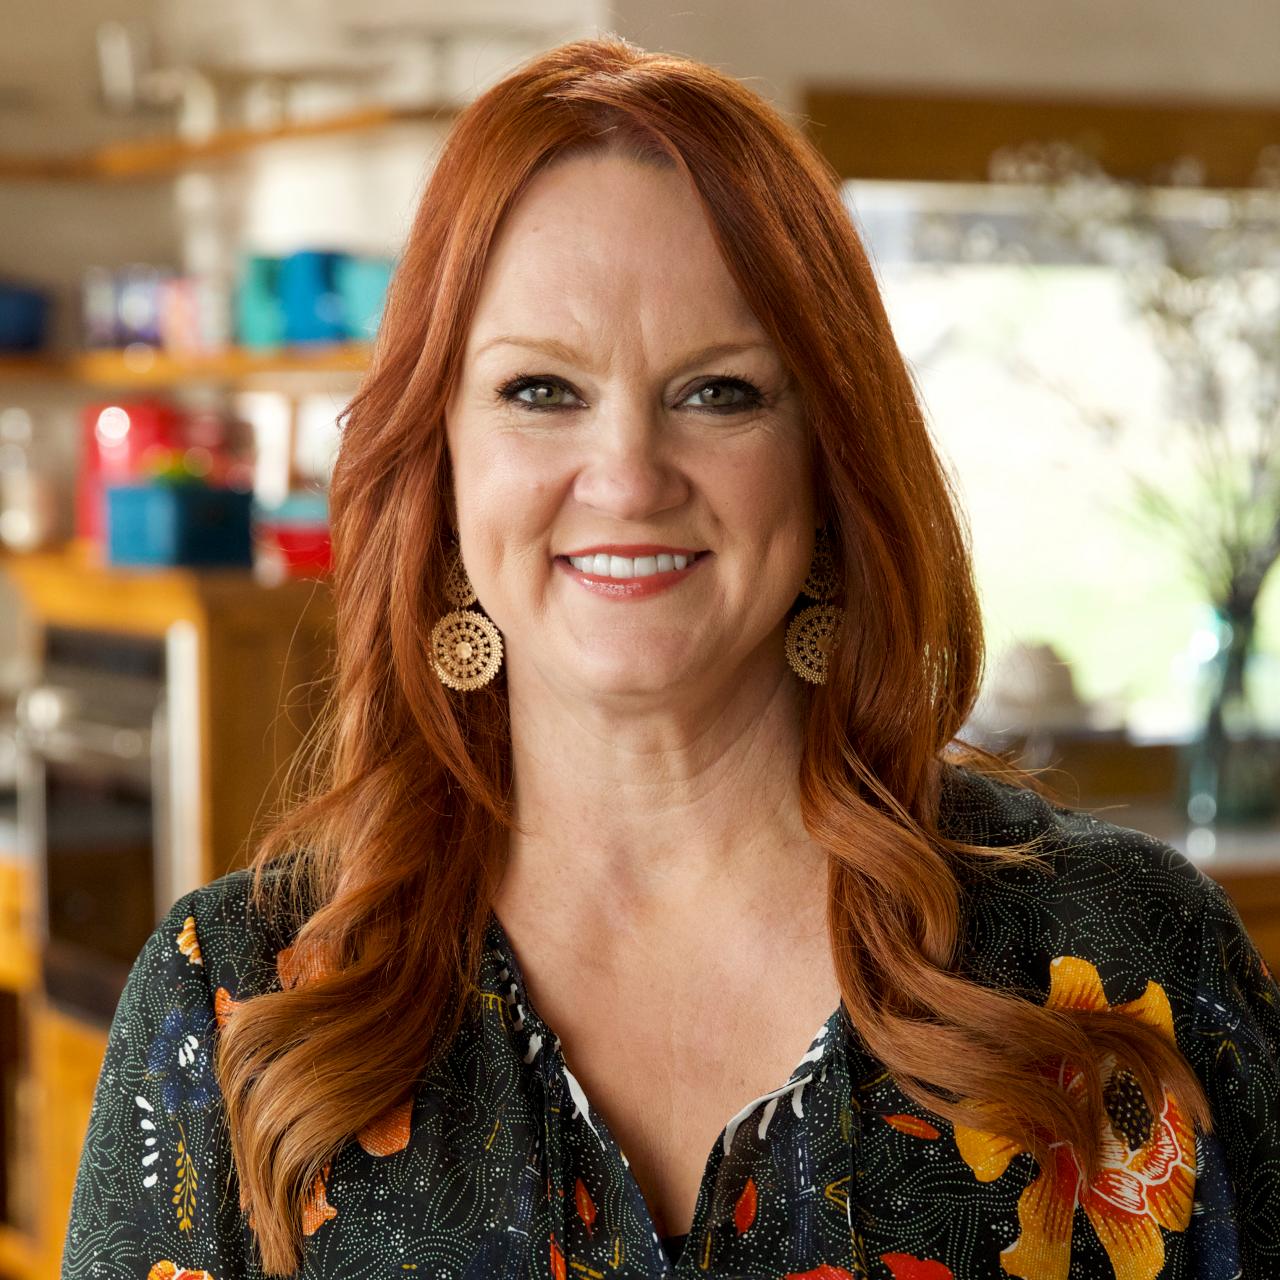 The Pioneer Woman: Behind the Scenes with Ree Drummond, The Pioneer Woman,  hosted by Ree Drummond